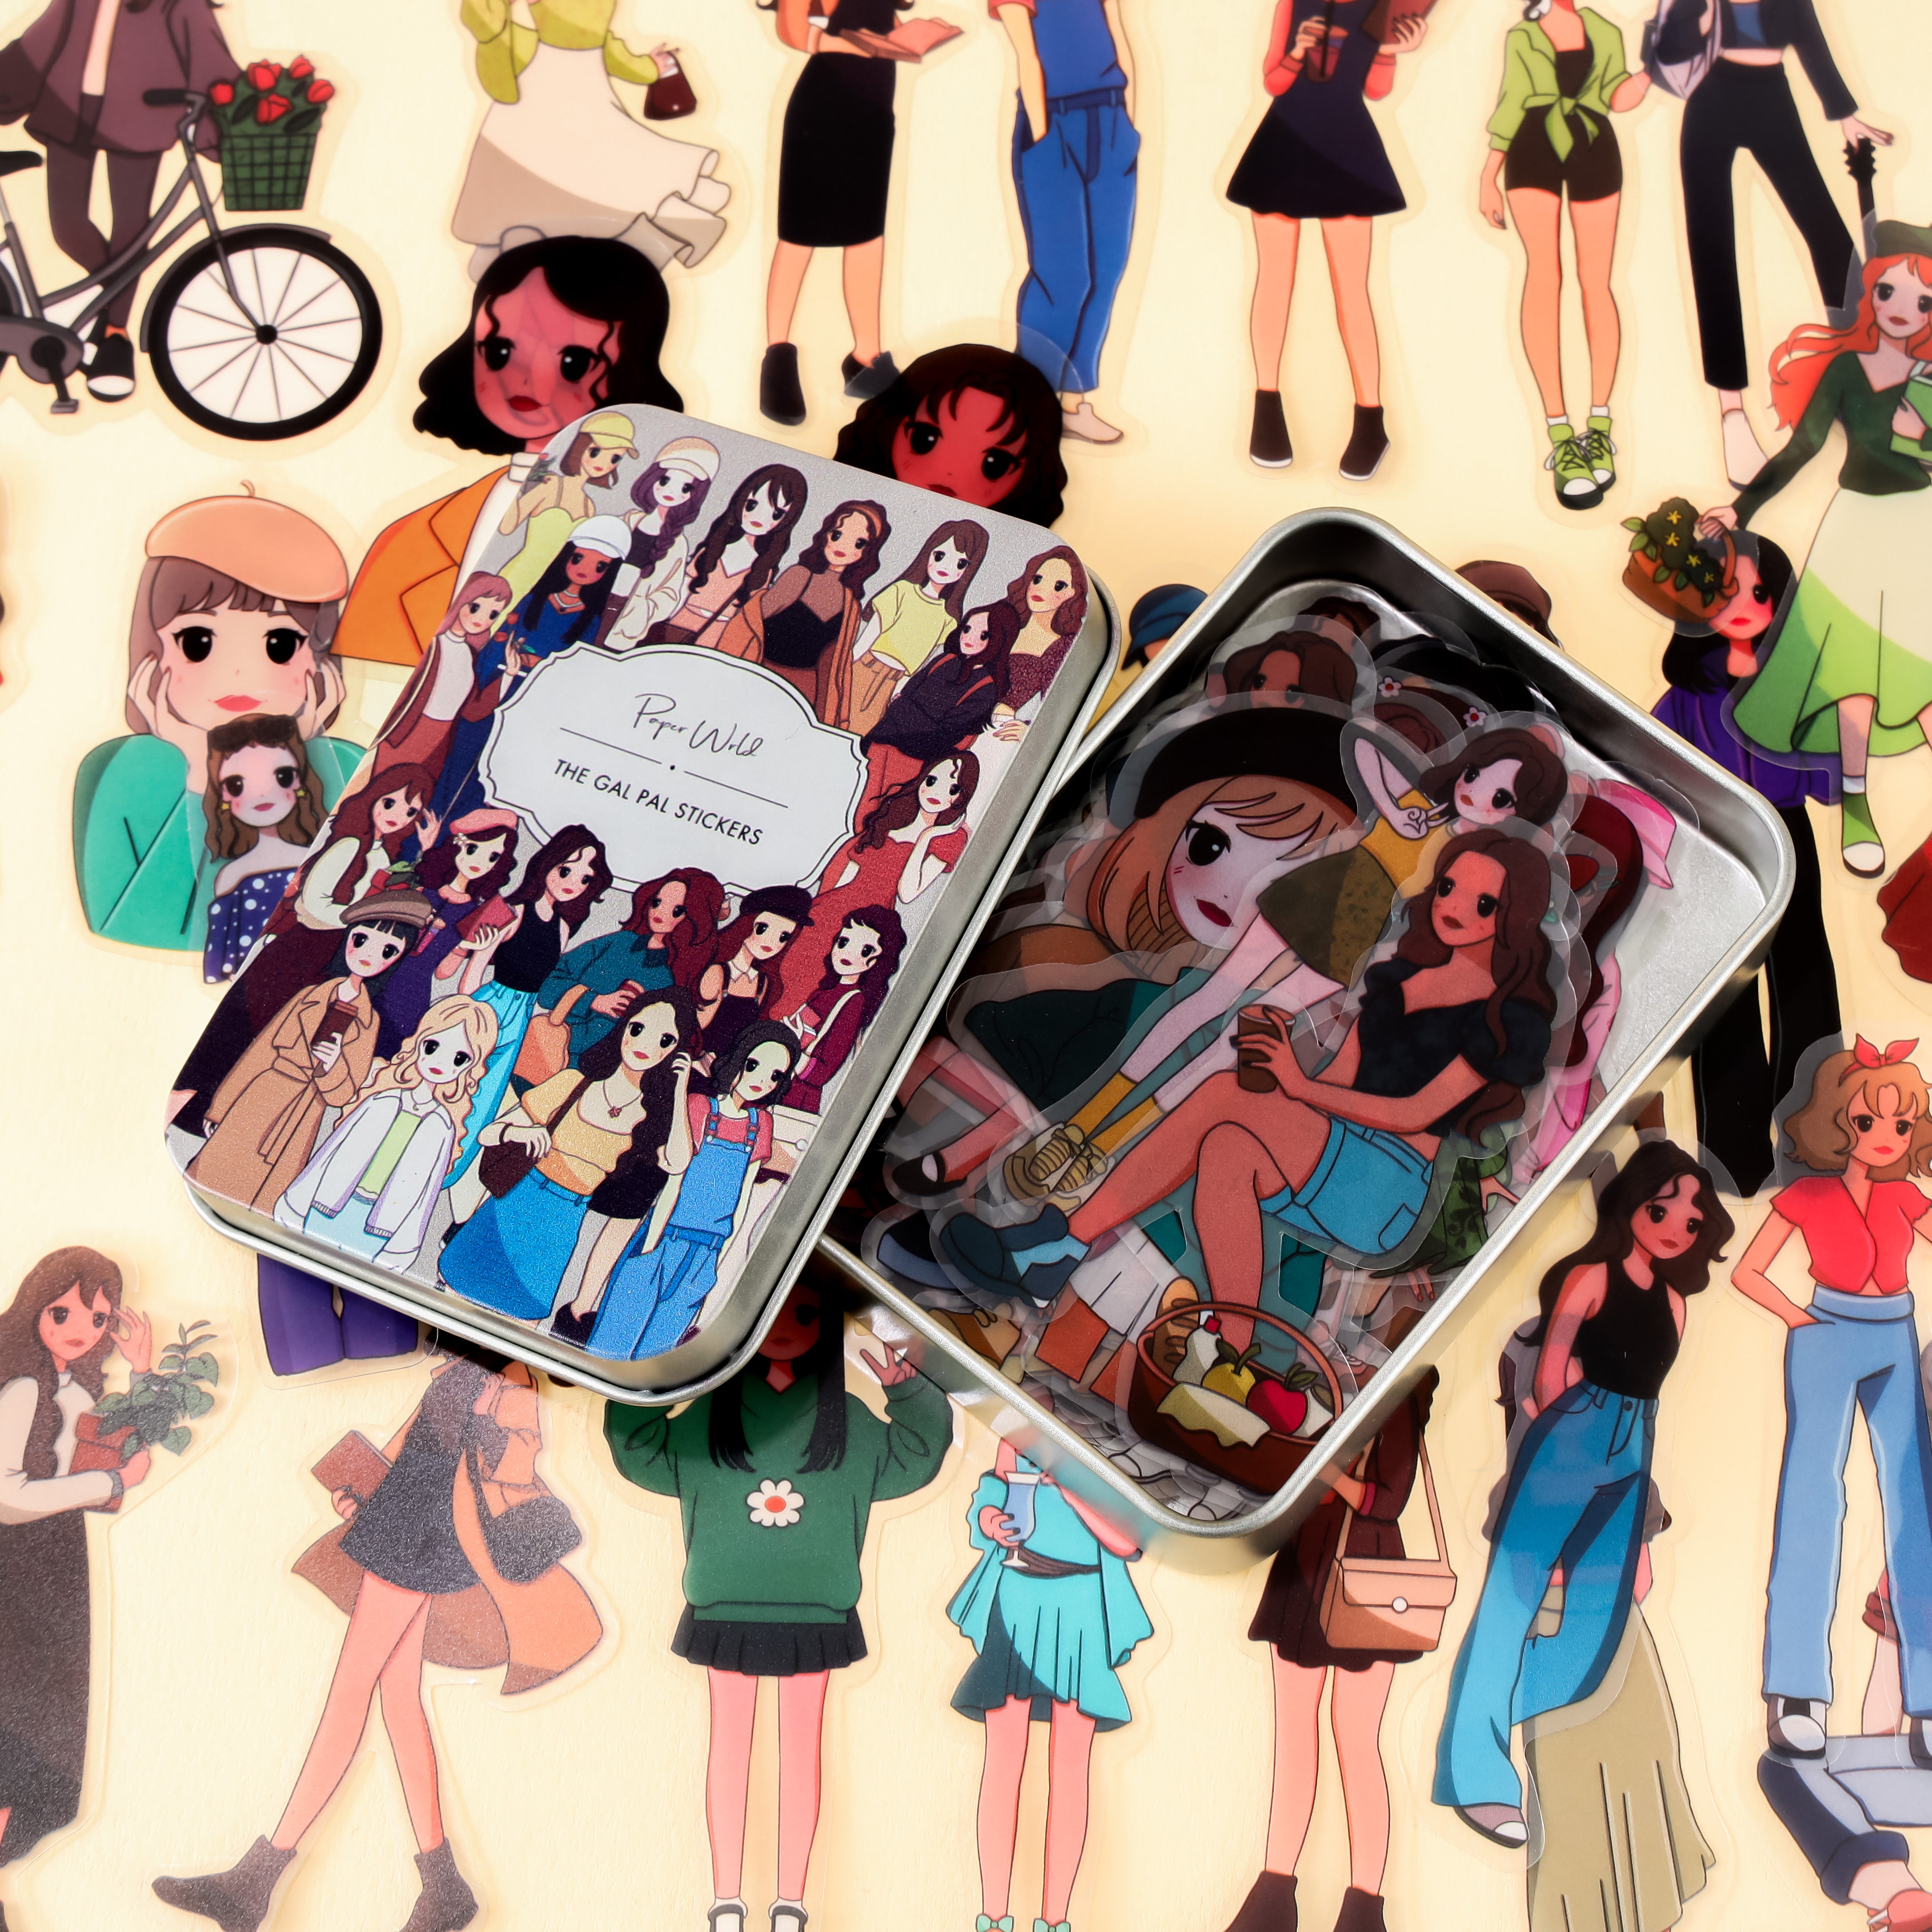 The Gal Pal Stickers